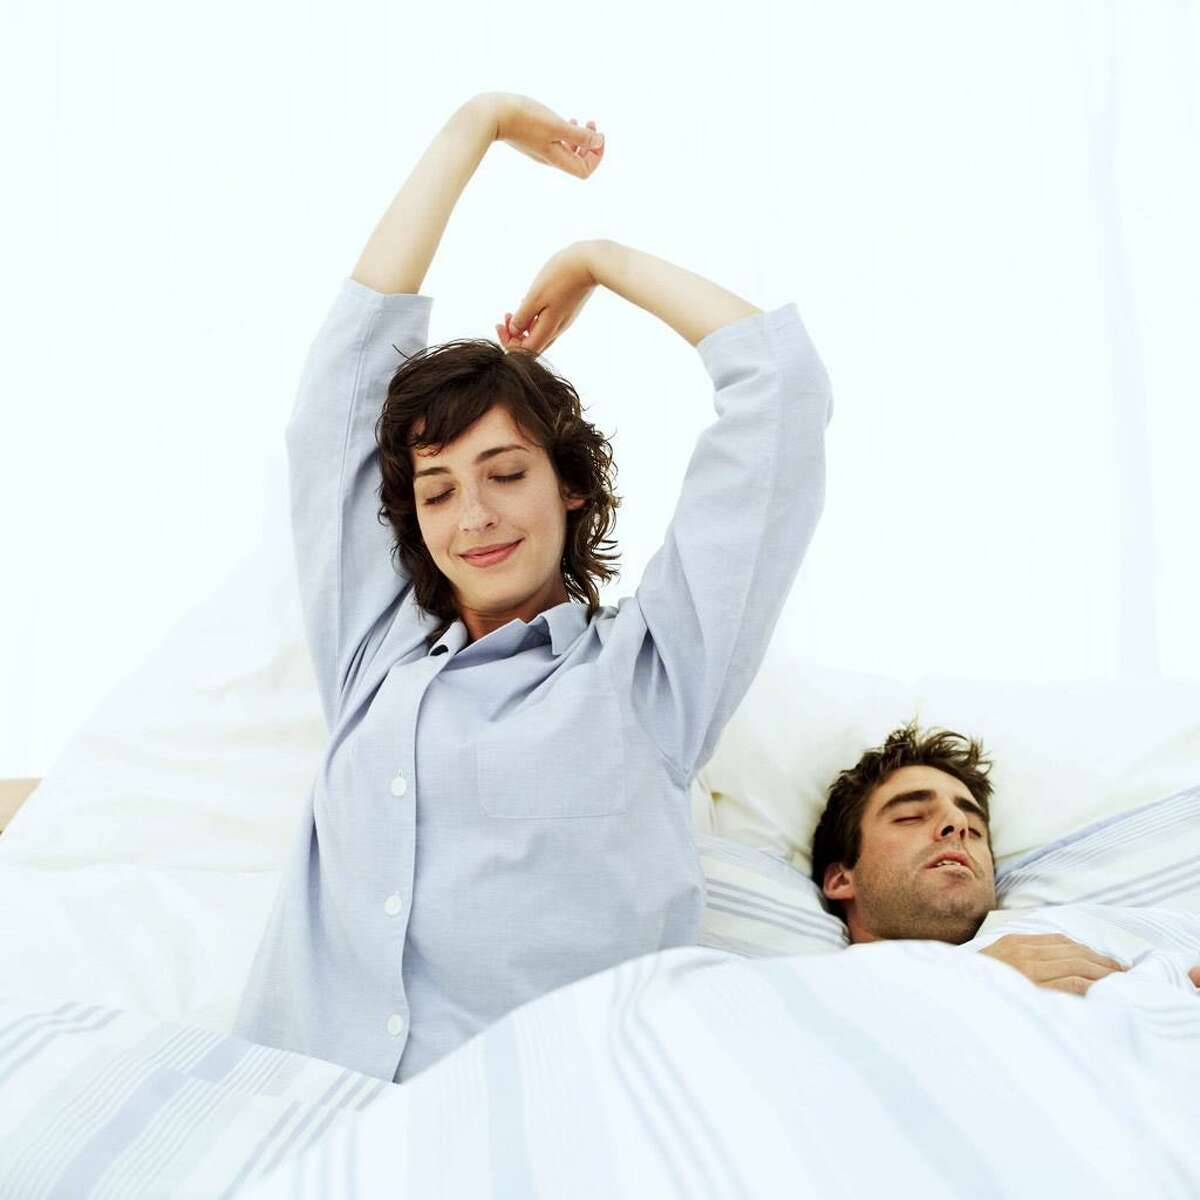 Griffin Hospital will host a free talk about sleep wellness on Tues., May 15 at 6 p.m.